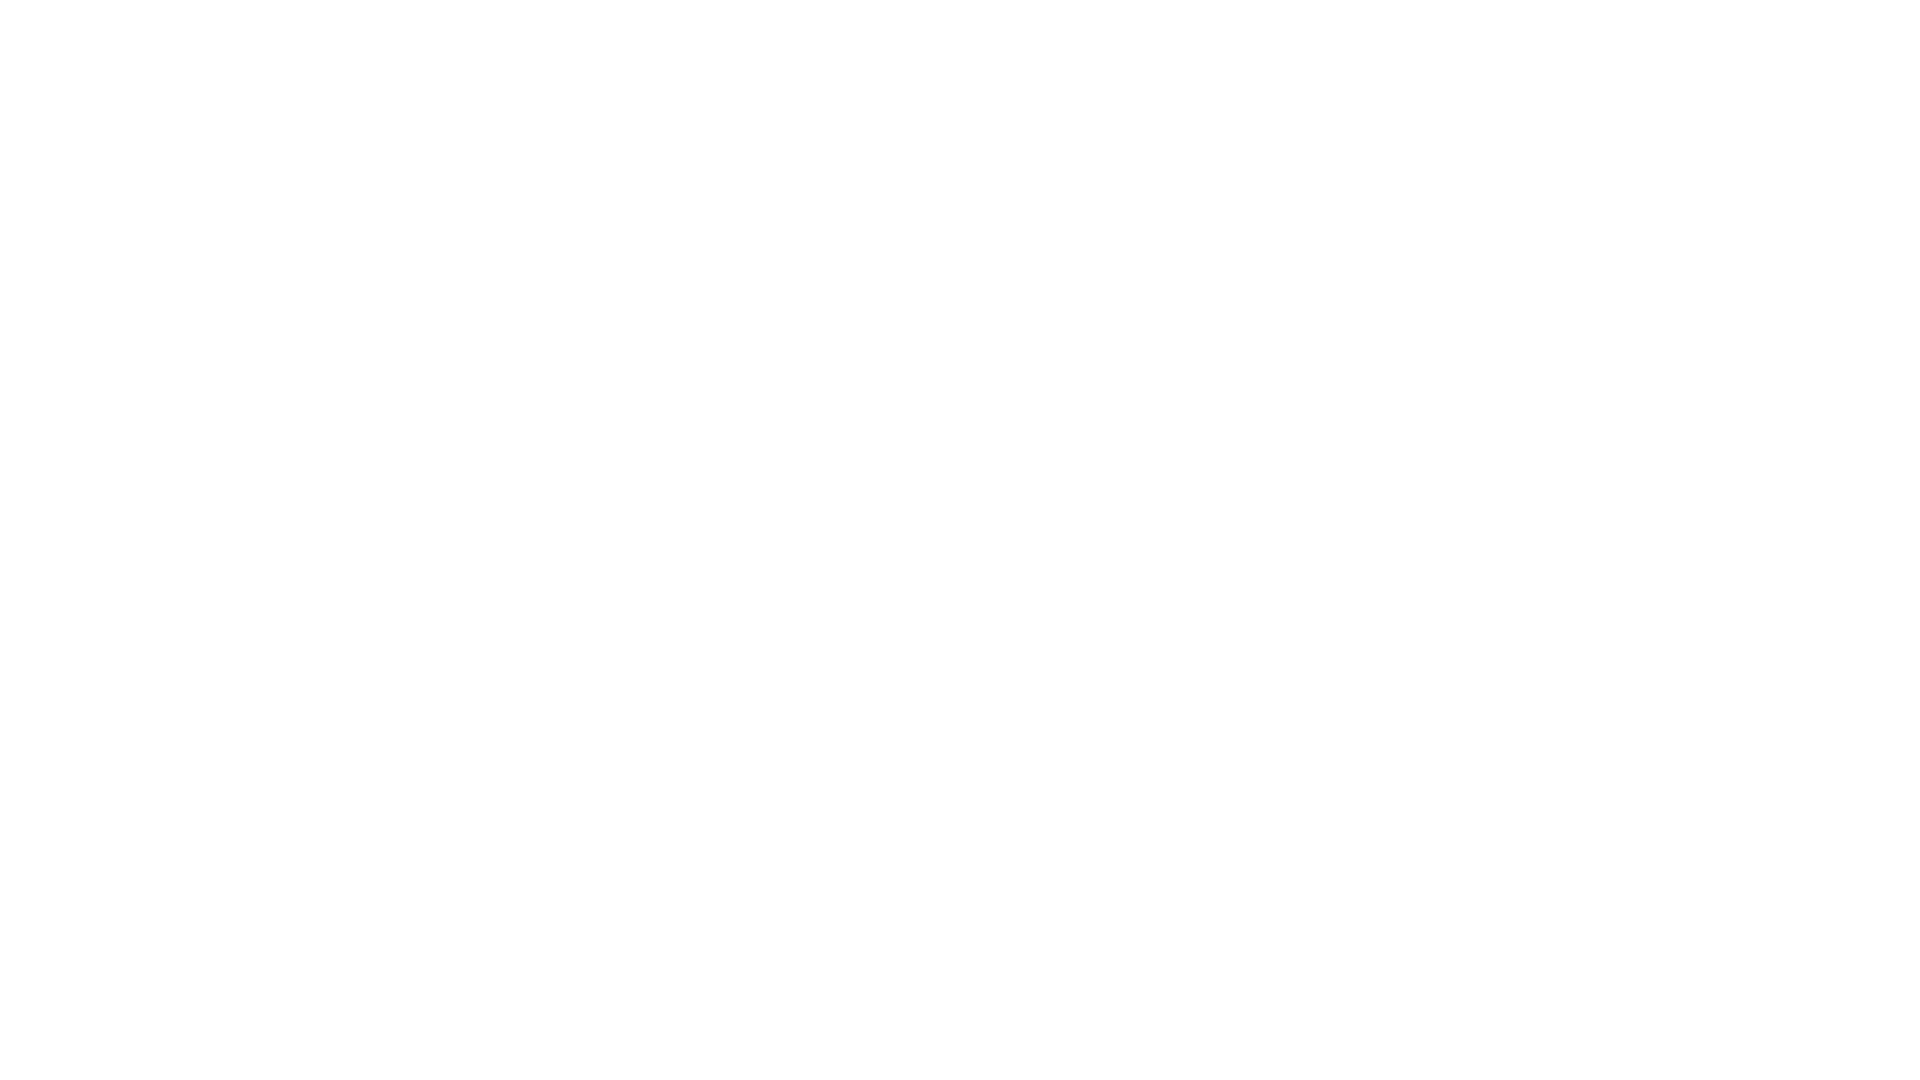 Be here to help. Our members and your teammates are counting on it.